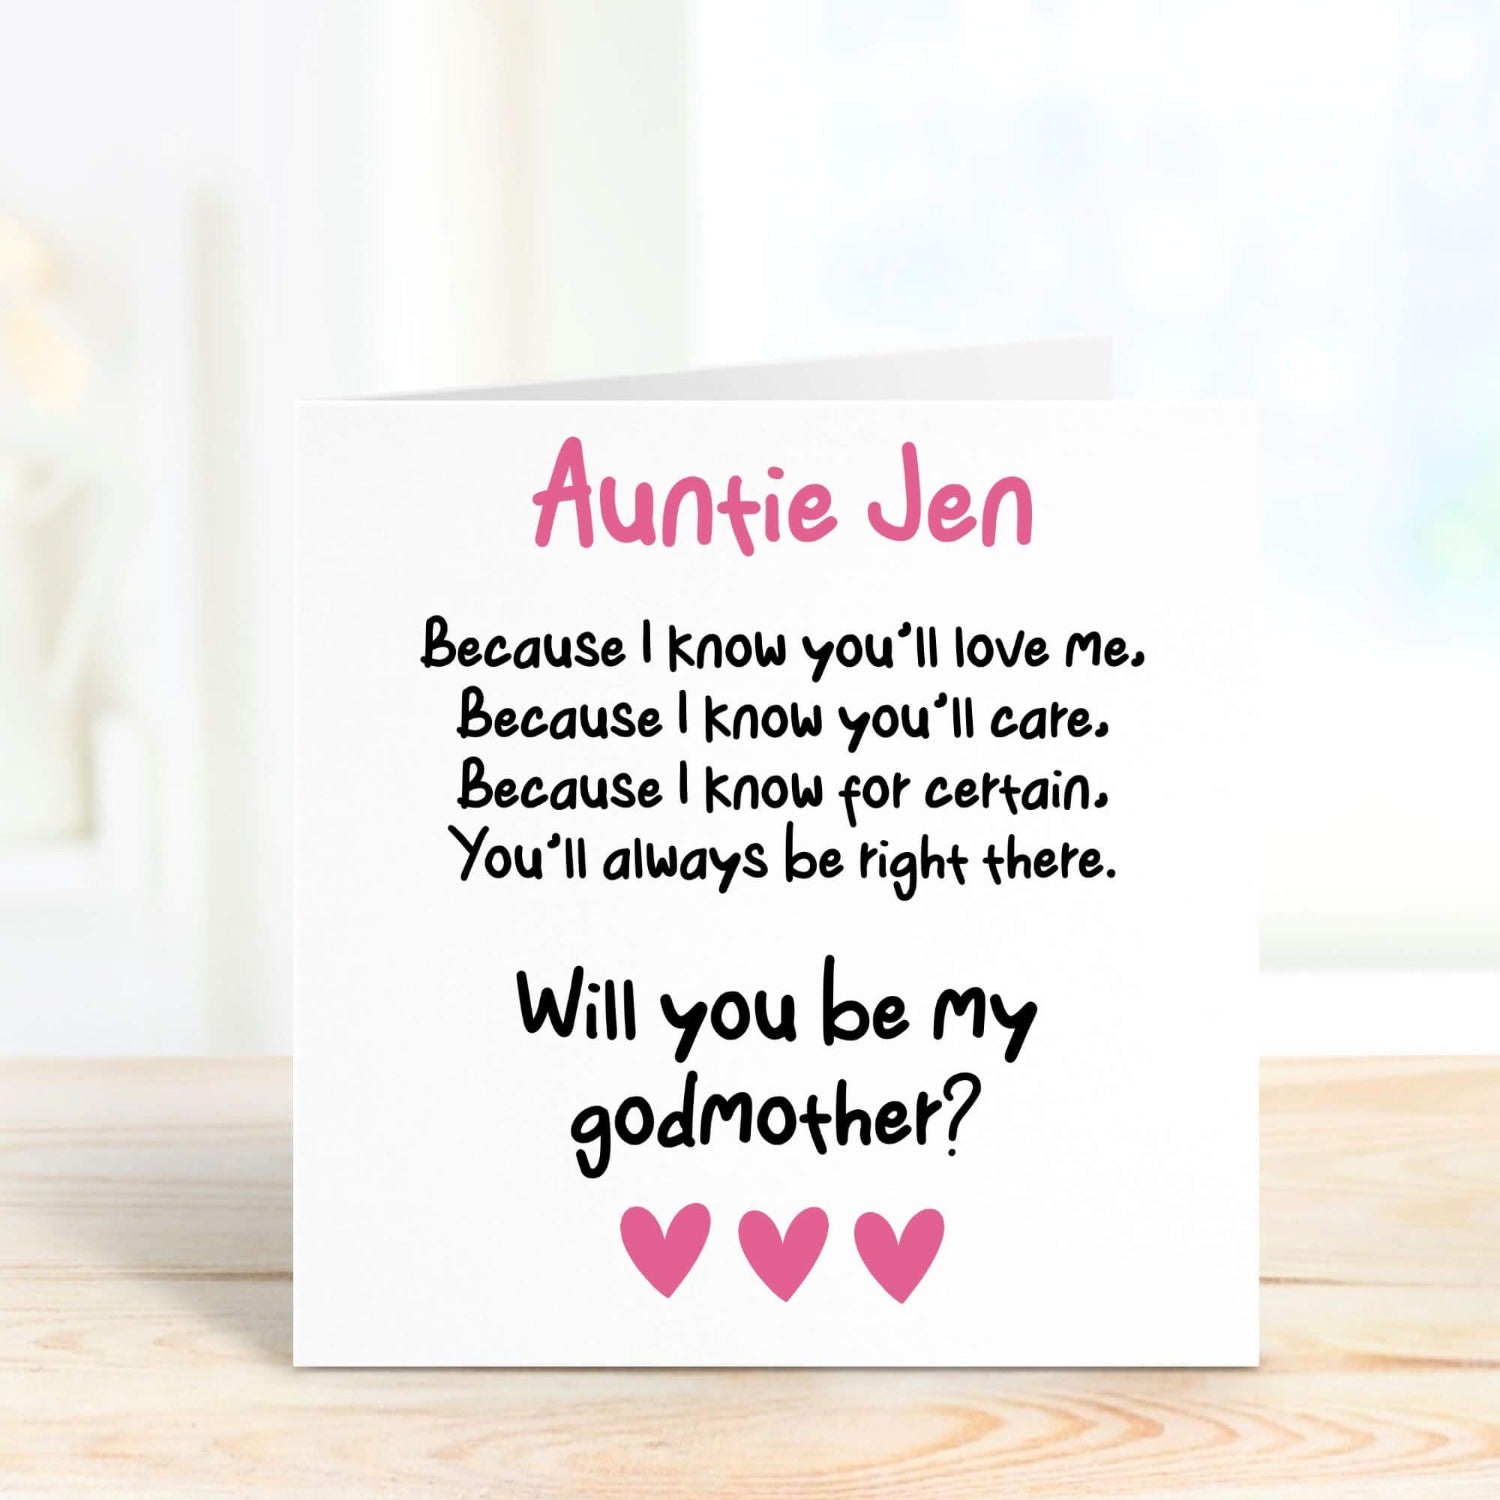 godmother proposal card with poem